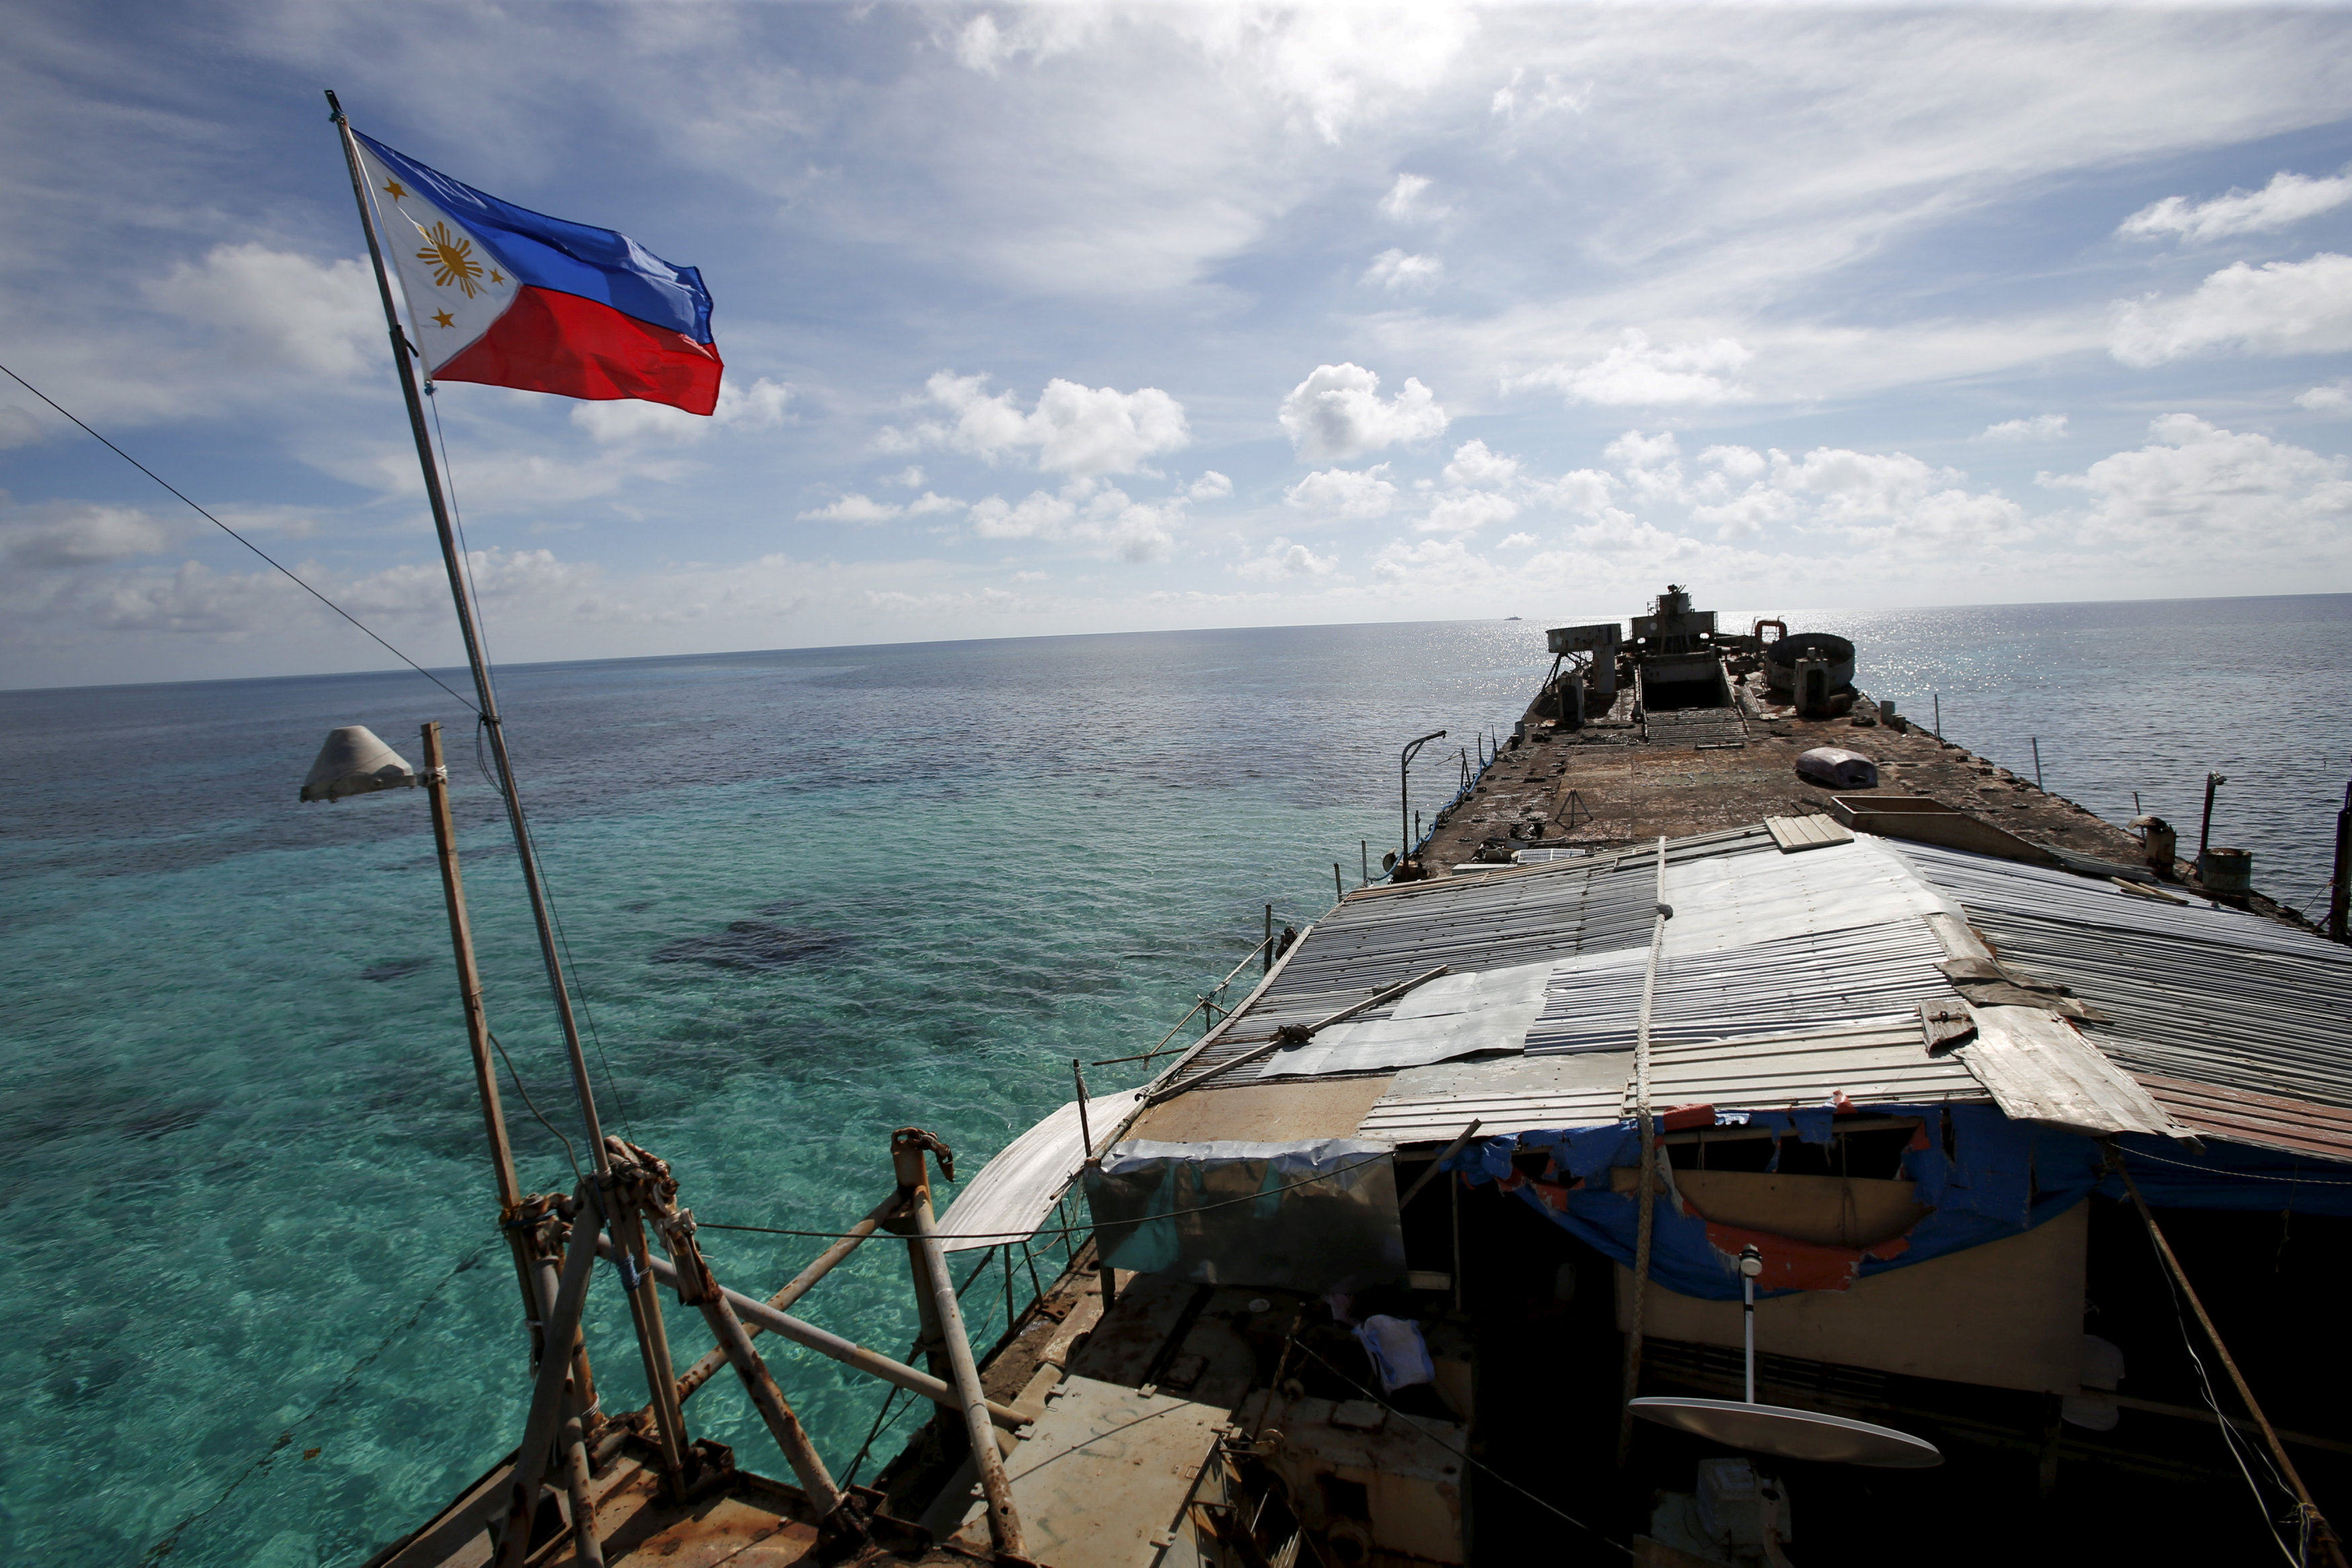 A Philippine flag flutters from BRP Sierra Madre, a dilapidated Philippine Navy ship that has been aground since 1999 on the disputed Second Thomas Shoal in the South China Sea. File photo: Reuters